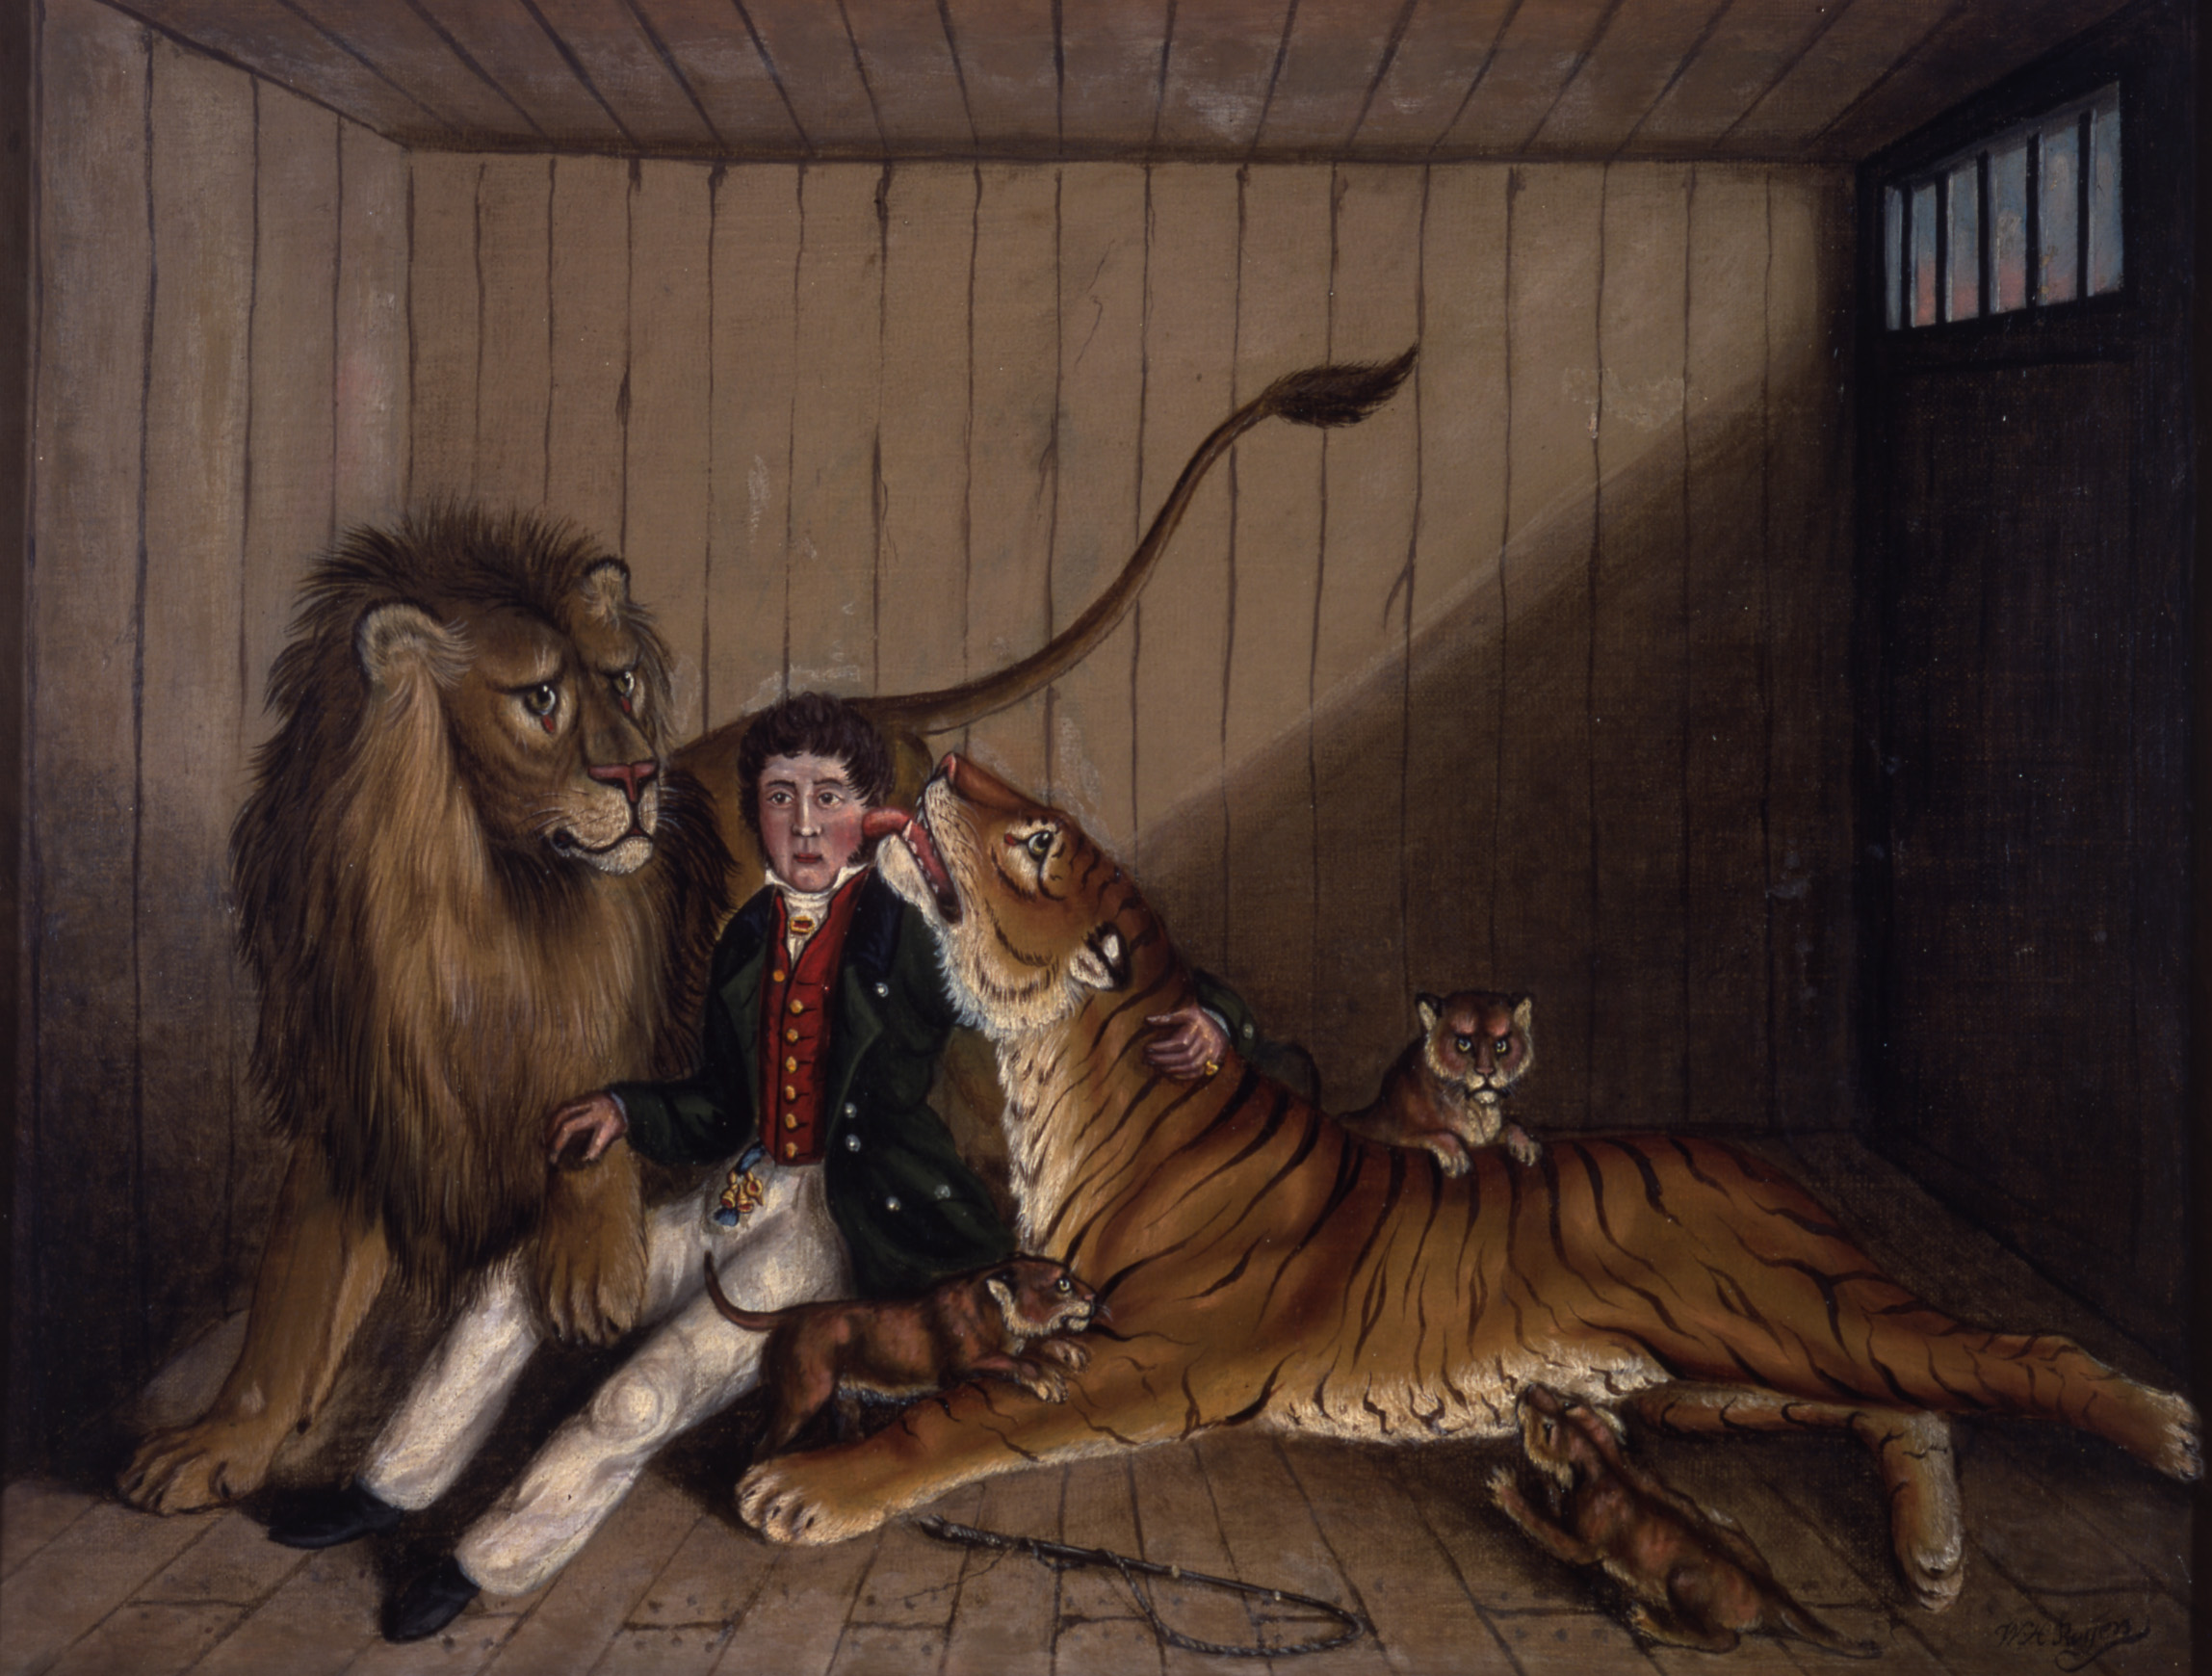 Compton Verney painting to be sent out to prisons as part of We Roar project